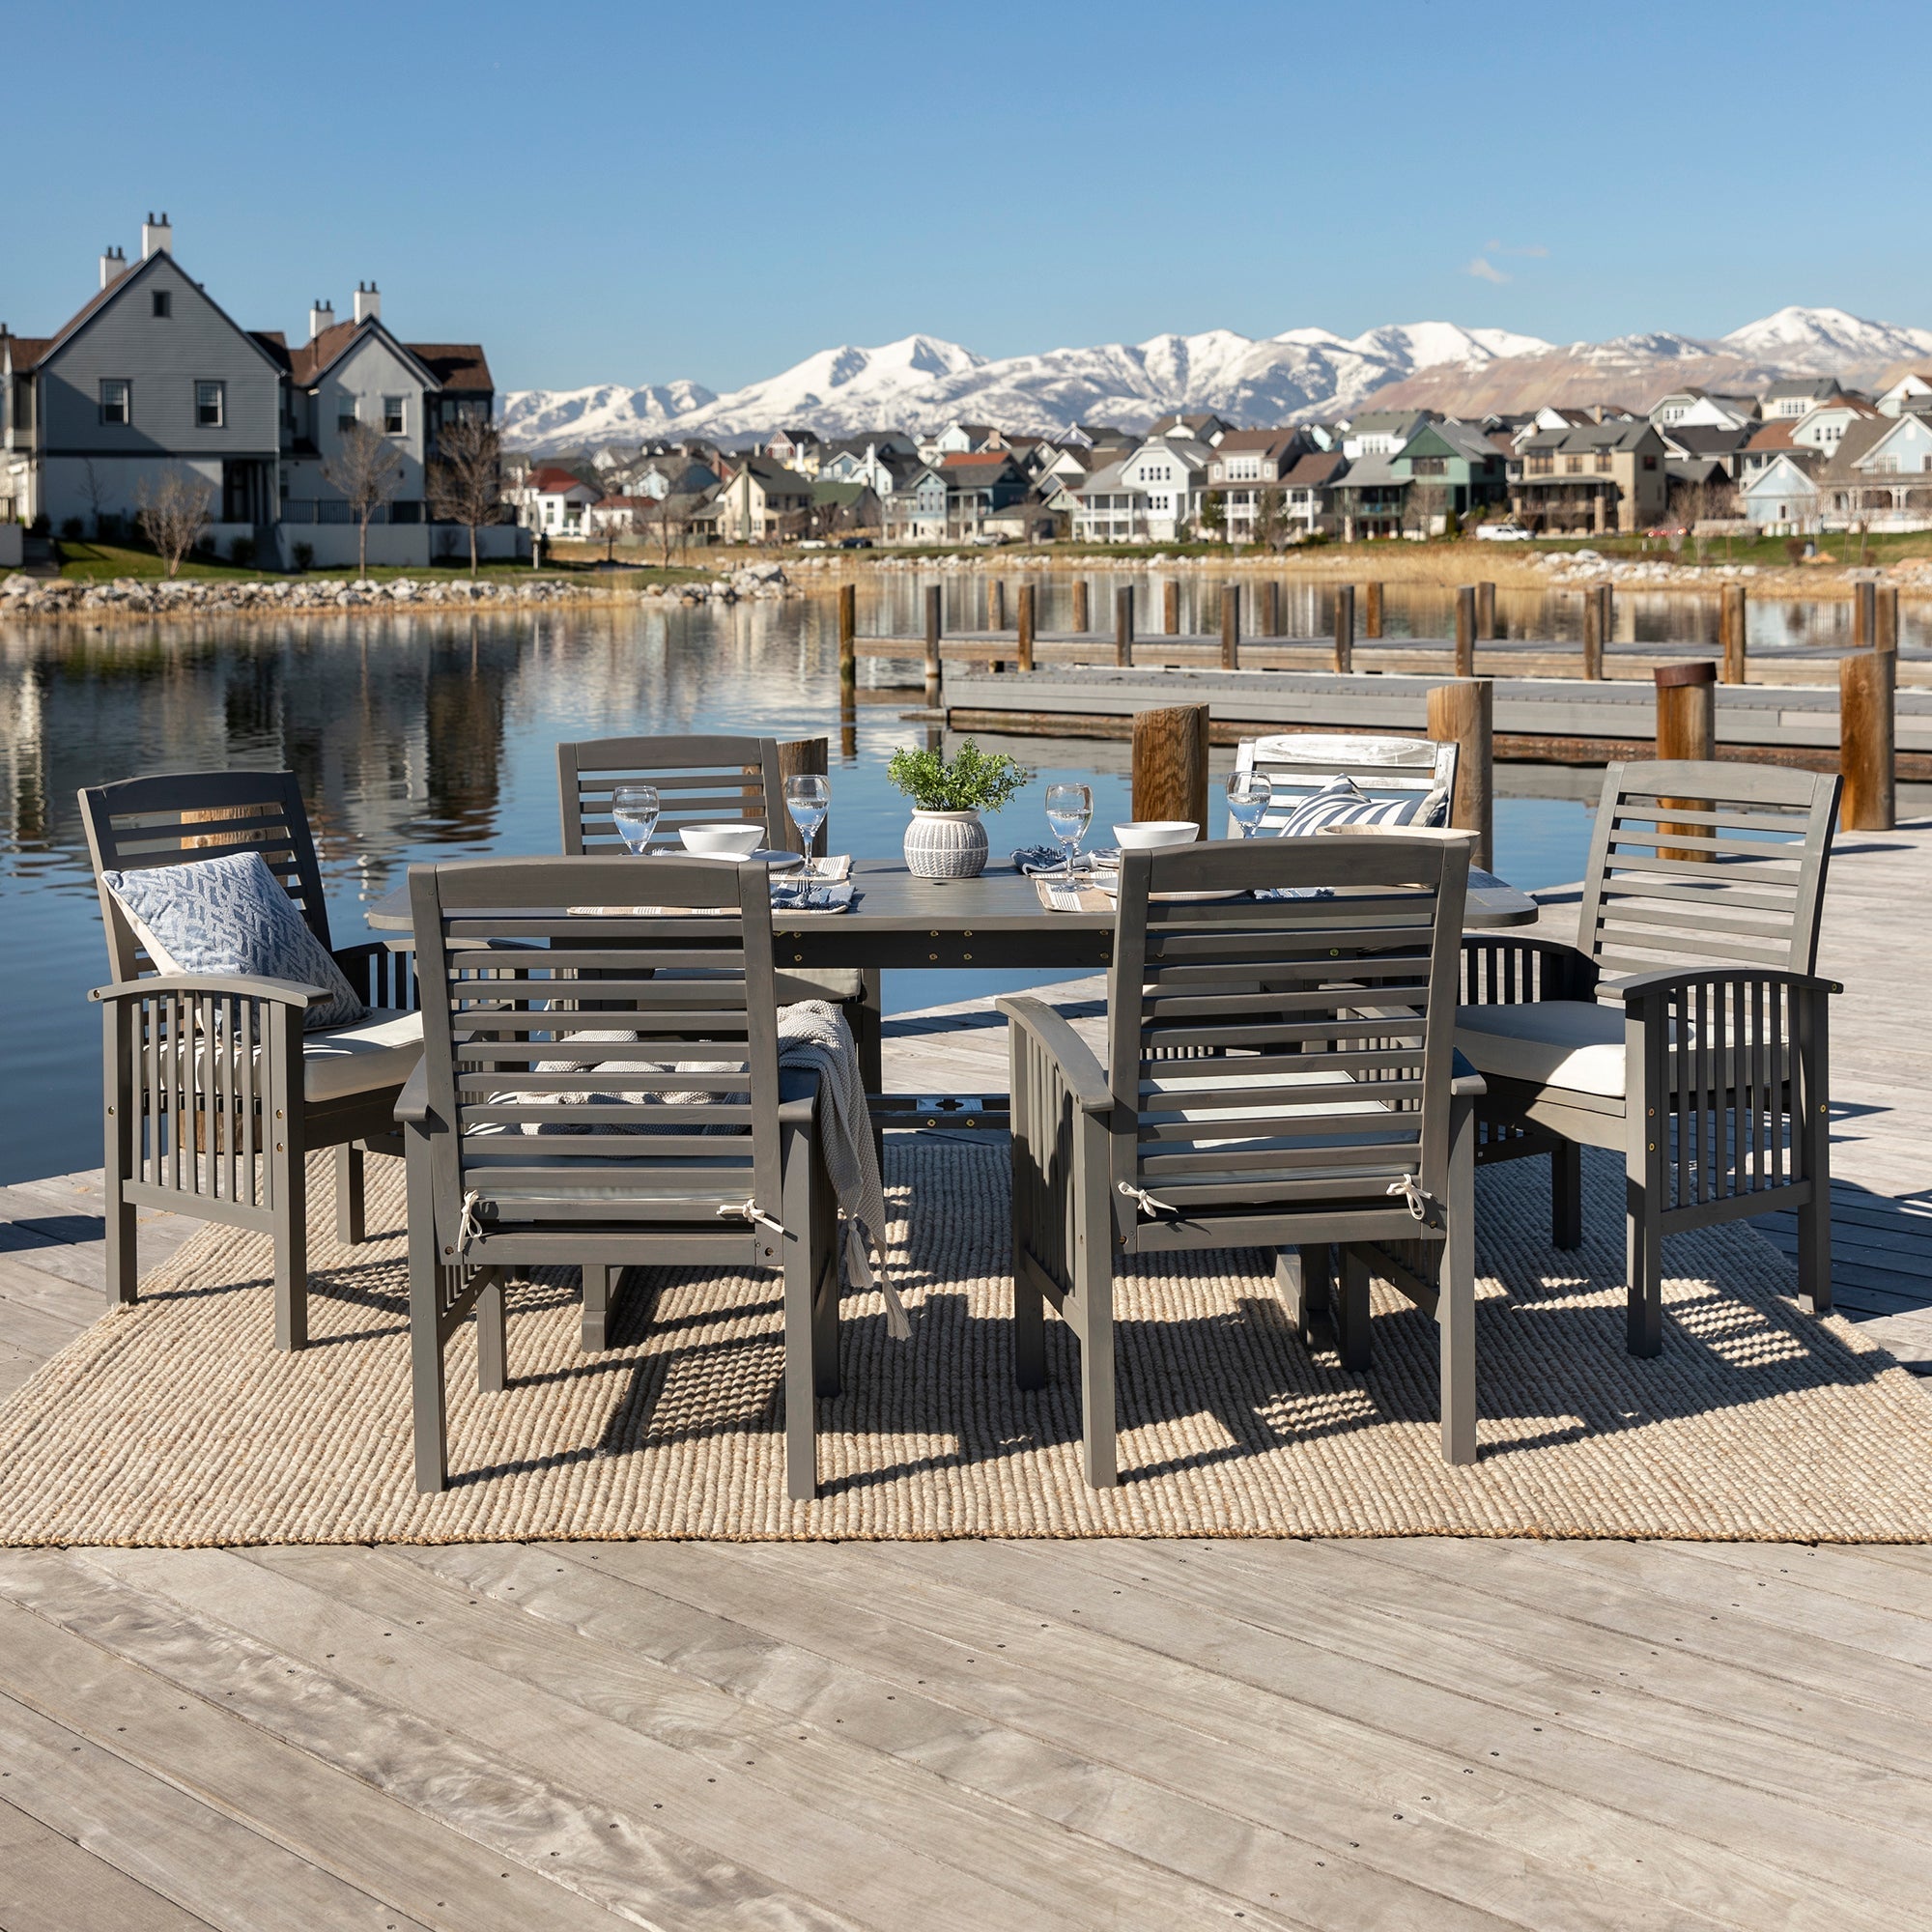 Midland 7-Piece Extendable Acacia Wood Outdoor Patio Dining Set with Cushions - East Shore Modern Home Furnishings